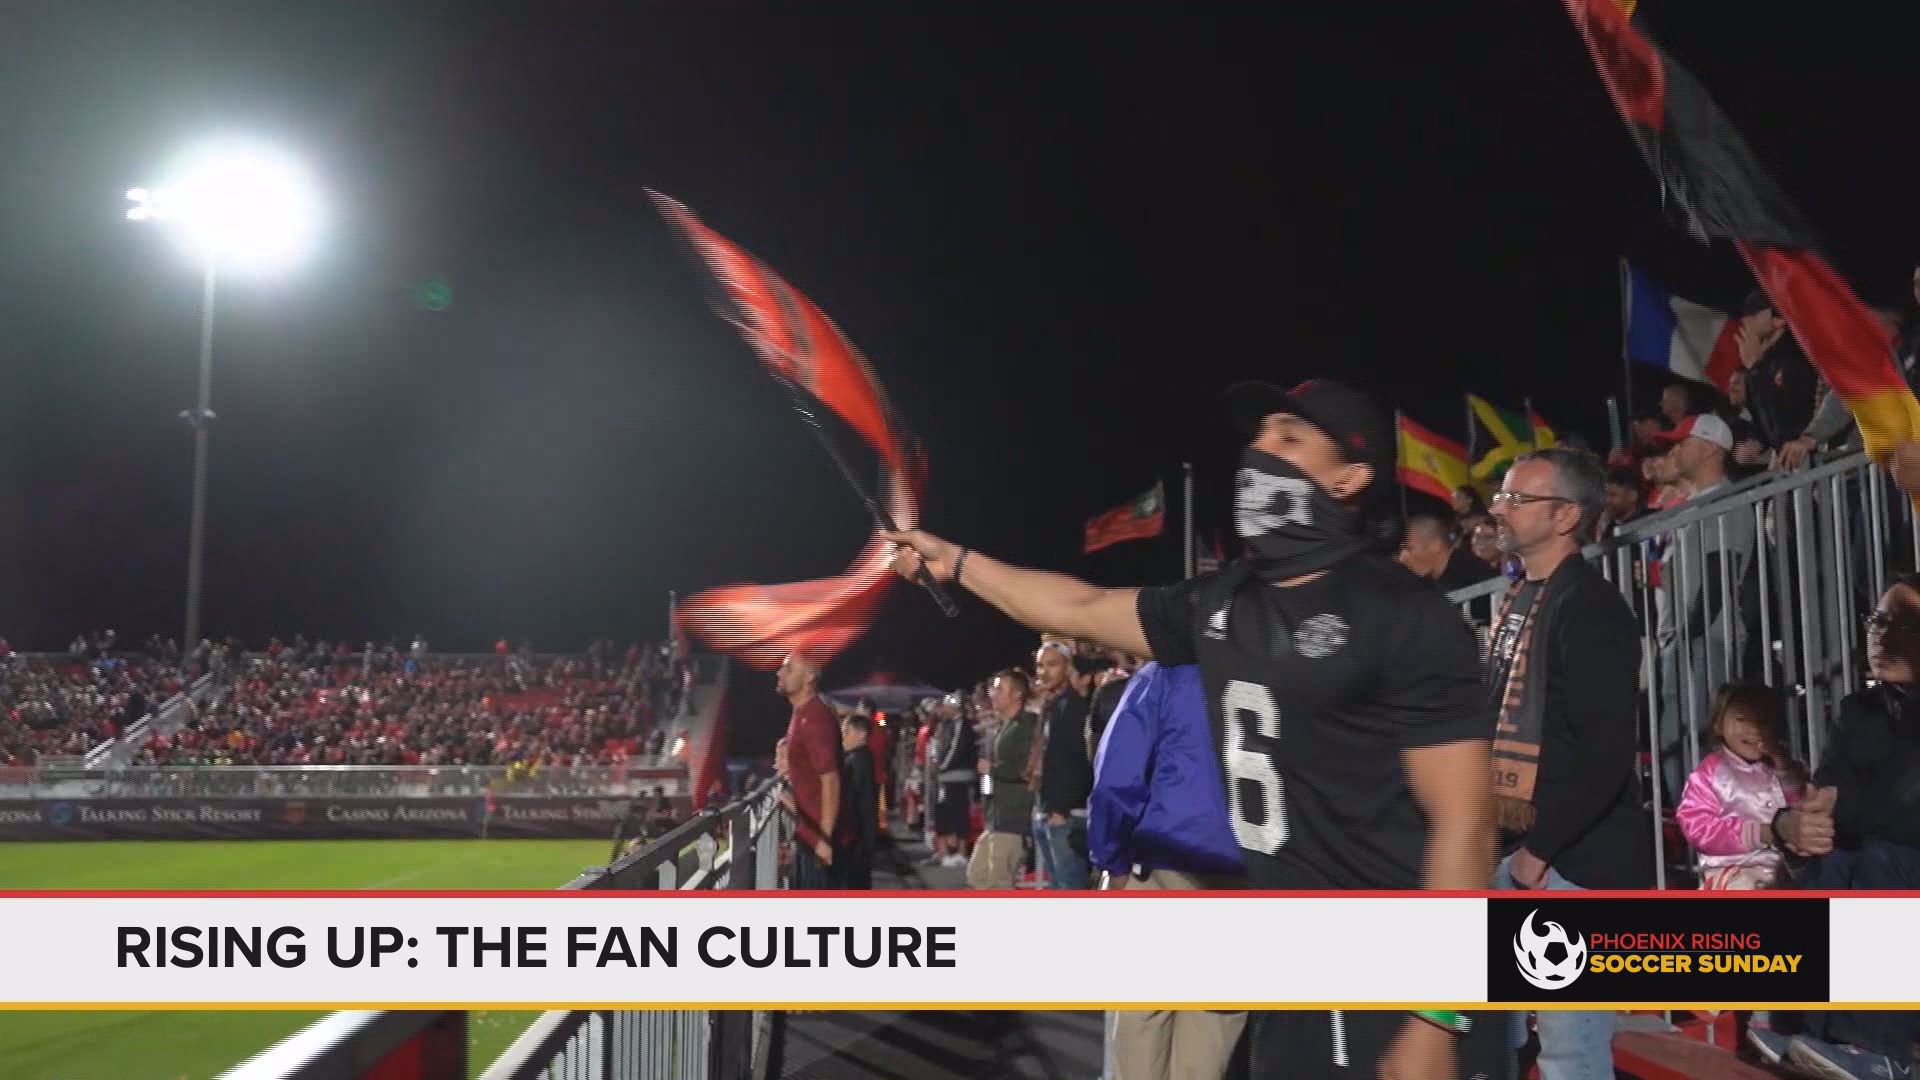 The Red Fury is Phoenix Rising FC's official fan section, and they put their heart and soul into cheering on their team. Check out their passion! This content is sponsored by the Phoenix Rising FC.